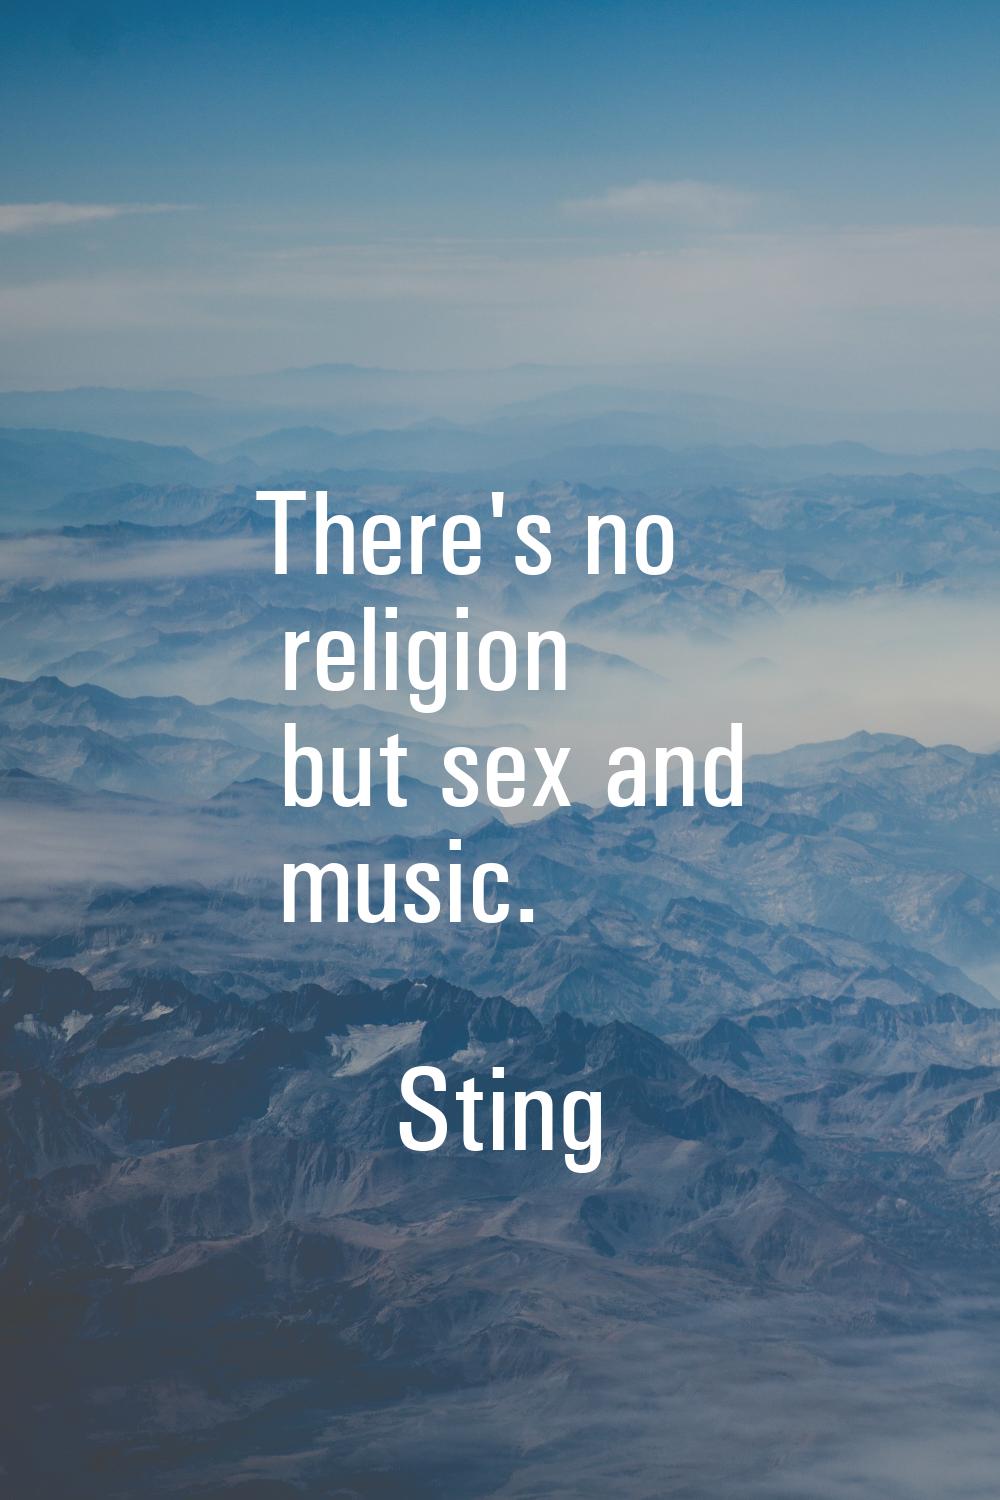 There's no religion but sex and music.